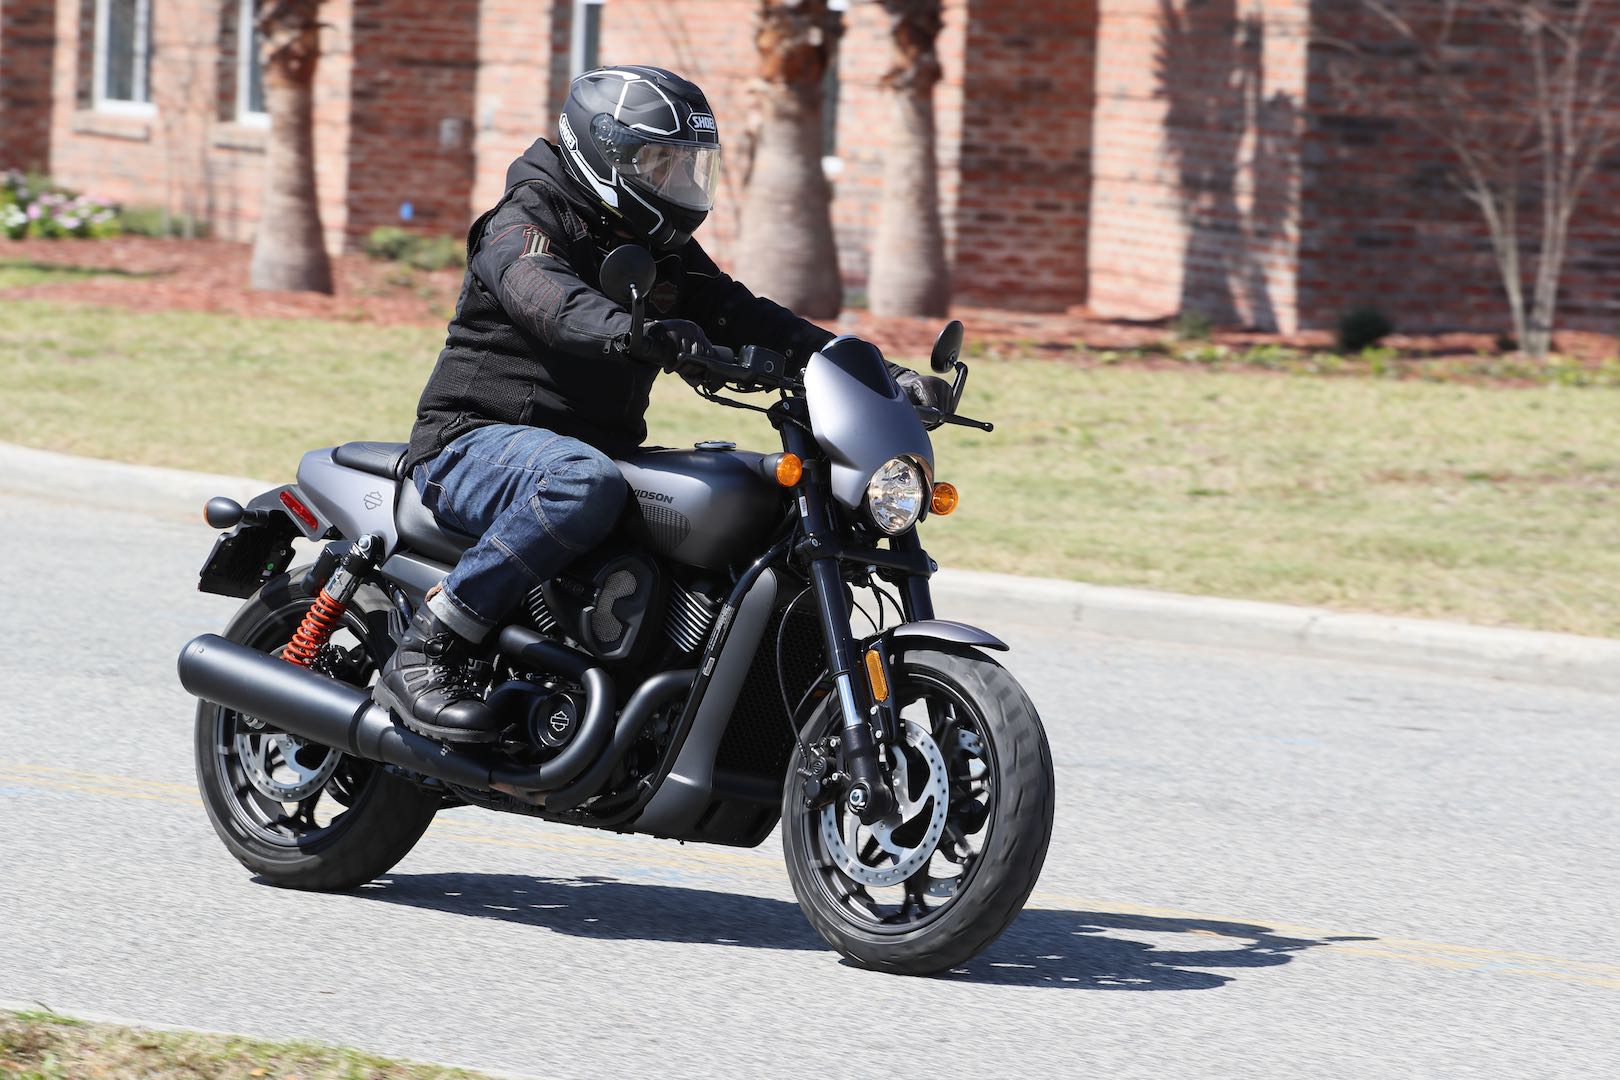 2017 Harley Davidson Street Rod First Ride Review Harley Lets Fly An Angrier Urban Sport Version Of Its Lovable Street 750 Gearopen Com